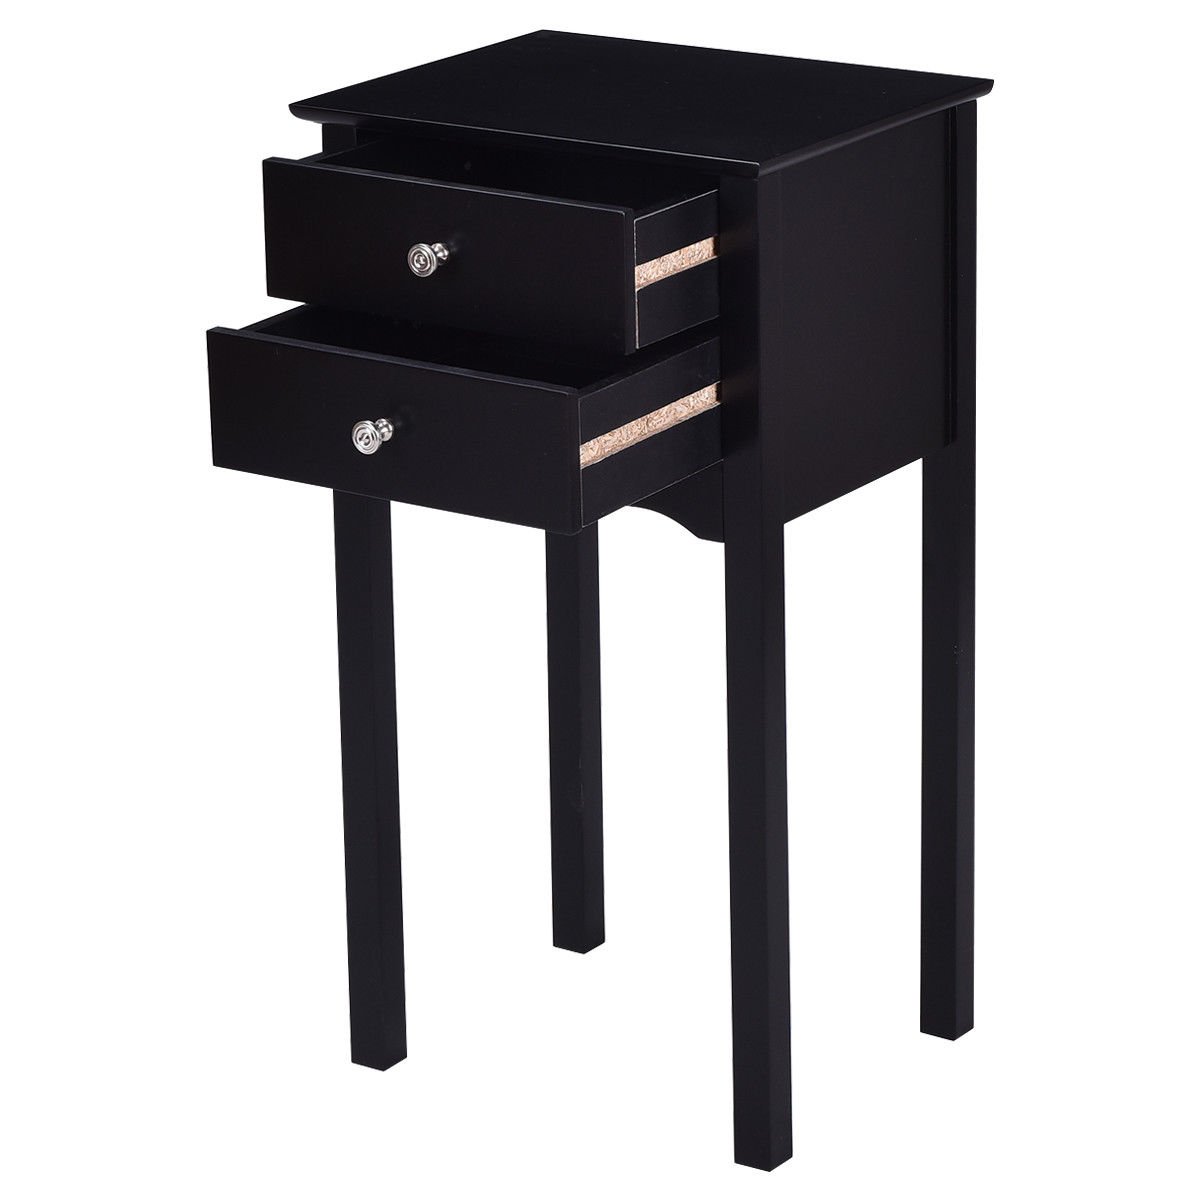 black side table end night stand non toxic timmy accent height drawers kitchen dining fifties style furniture coffee tables sydney metal floor transitions home sets next lamps